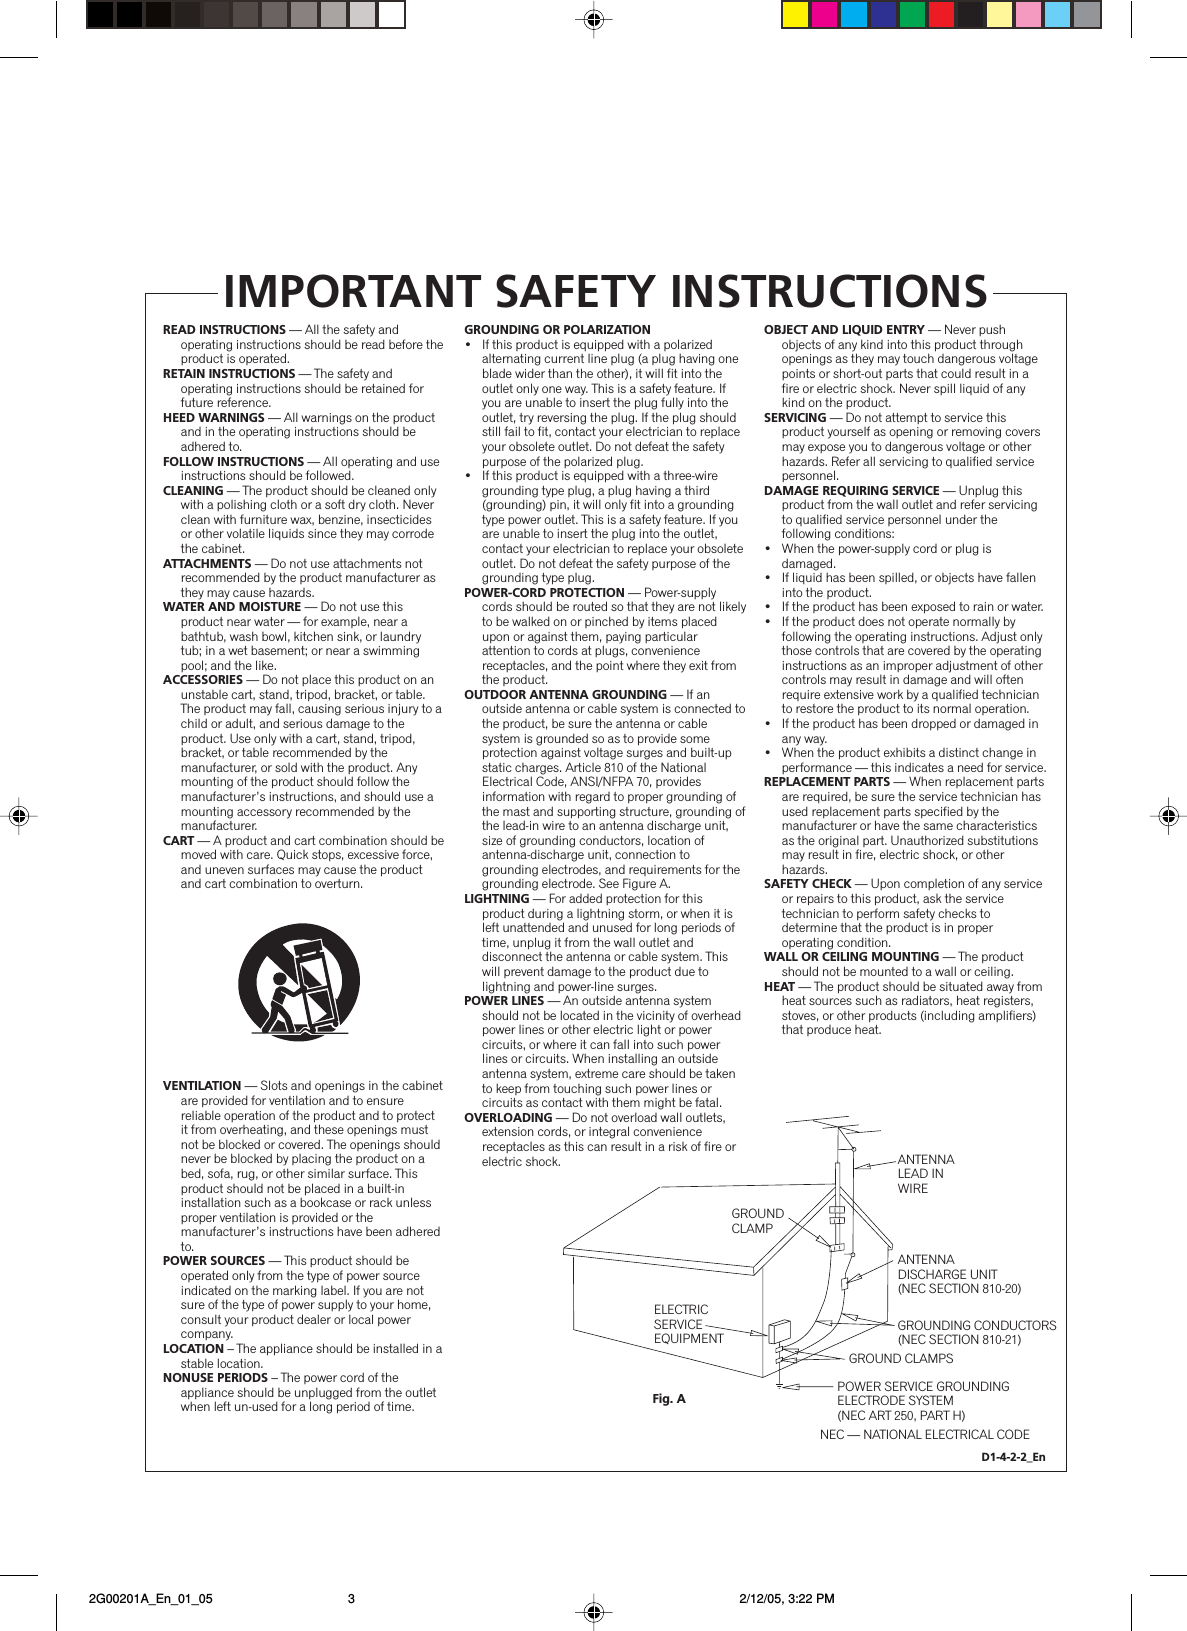 READ INSTRUCTIONS — All the safety and operating instructions should be read before the product is operated.RETAIN INSTRUCTIONS — The safety and operating instructions should be retained for future reference.HEED WARNINGS — All warnings on the product and in the operating instructions should be adhered to.FOLLOW INSTRUCTIONS — All operating and use instructions should be followed.CLEANING — The product should be cleaned only with a polishing cloth or a soft dry cloth. Never clean with furniture wax, benzine, insecticides or other volatile liquids since they may corrode the cabinet.ATTACHMENTS — Do not use attachments not recommended by the product manufacturer as they may cause hazards.WATER AND MOISTURE — Do not use this product near water — for example, near a bathtub, wash bowl, kitchen sink, or laundry tub; in a wet basement; or near a swimming pool; and the like.ACCESSORIES — Do not place this product on an unstable cart, stand, tripod, bracket, or table. The product may fall, causing serious injury to a child or adult, and serious damage to the product. Use only with a cart, stand, tripod, bracket, or table recommended by the manufacturer, or sold with the product. Any mounting of the product should follow the manufacturer’s instructions, and should use a mounting accessory recommended by the manufacturer.CART — A product and cart combination should be moved with care. Quick stops, excessive force, and uneven surfaces may cause the product and cart combination to overturn.VENTILATION — Slots and openings in the cabinet are provided for ventilation and to ensure reliable operation of the product and to protect it from overheating, and these openings must not be blocked or covered. The openings should never be blocked by placing the product on a bed, sofa, rug, or other similar surface. This product should not be placed in a built-in installation such as a bookcase or rack unless proper ventilation is provided or the manufacturer’s instructions have been adhered to.POWER SOURCES — This product should be operated only from the type of power source indicated on the marking label. If you are not sure of the type of power supply to your home, consult your product dealer or local power company.LOCATION – The appliance should be installed in a stable location.NONUSE PERIODS – The power cord of the appliance should be unplugged from the outlet when left un-used for a long period of time.GROUNDING OR POLARIZATION•  If this product is equipped with a polarized alternating current line plug (a plug having one blade wider than the other), it will fit into the outlet only one way. This is a safety feature. If you are unable to insert the plug fully into the outlet, try reversing the plug. If the plug should still fail to fit, contact your electrician to replace your obsolete outlet. Do not defeat the safety purpose of the polarized plug.•  If this product is equipped with a three-wire grounding type plug, a plug having a third (grounding) pin, it will only fit into a grounding type power outlet. This is a safety feature. If you are unable to insert the plug into the outlet, contact your electrician to replace your obsolete outlet. Do not defeat the safety purpose of the grounding type plug.POWER-CORD PROTECTION — Power-supply cords should be routed so that they are not likely to be walked on or pinched by items placed upon or against them, paying particular attention to cords at plugs, convenience receptacles, and the point where they exit from the product.OUTDOOR ANTENNA GROUNDING — If an outside antenna or cable system is connected to the product, be sure the antenna or cable system is grounded so as to provide some protection against voltage surges and built-up static charges. Article 810 of the National Electrical Code, ANSI/NFPA 70, provides information with regard to proper grounding of the mast and supporting structure, grounding of the lead-in wire to an antenna discharge unit, size of grounding conductors, location of antenna-discharge unit, connection to grounding electrodes, and requirements for the grounding electrode. See Figure A.LIGHTNING — For added protection for this product during a lightning storm, or when it is left unattended and unused for long periods of time, unplug it from the wall outlet and disconnect the antenna or cable system. This will prevent damage to the product due to lightning and power-line surges.POWER LINES — An outside antenna system should not be located in the vicinity of overhead power lines or other electric light or power circuits, or where it can fall into such power lines or circuits. When installing an outside antenna system, extreme care should be taken to keep from touching such power lines or circuits as contact with them might be fatal.OVERLOADING — Do not overload wall outlets, extension cords, or integral convenience receptacles as this can result in a risk of fire or electric shock.OBJECT AND LIQUID ENTRY — Never push objects of any kind into this product through openings as they may touch dangerous voltage points or short-out parts that could result in a fire or electric shock. Never spill liquid of any kind on the product.SERVICING — Do not attempt to service this product yourself as opening or removing covers may expose you to dangerous voltage or other hazards. Refer all servicing to qualified service personnel.DAMAGE REQUIRING SERVICE — Unplug this product from the wall outlet and refer servicing to qualified service personnel under the following conditions:•  When the power-supply cord or plug is damaged.•  If liquid has been spilled, or objects have fallen into the product.•  If the product has been exposed to rain or water.•  If the product does not operate normally by following the operating instructions. Adjust only those controls that are covered by the operating instructions as an improper adjustment of other controls may result in damage and will often require extensive work by a qualified technician to restore the product to its normal operation.•  If the product has been dropped or damaged in any way.•  When the product exhibits a distinct change in performance — this indicates a need for service.REPLACEMENT PARTS — When replacement parts are required, be sure the service technician has used replacement parts specified by the manufacturer or have the same characteristics as the original part. Unauthorized substitutions may result in fire, electric shock, or other hazards.SAFETY CHECK — Upon completion of any service or repairs to this product, ask the service technician to perform safety checks to determine that the product is in proper operating condition.WALL OR CEILING MOUNTING — The product should not be mounted to a wall or ceiling.HEAT — The product should be situated away from heat sources such as radiators, heat registers, stoves, or other products (including amplifiers) that produce heat.GROUNDCLAMPELECTRICSERVICEEQUIPMENTANTENNALEAD IN WIREANTENNADISCHARGE UNIT(NEC SECTION 810-20)GROUNDING CONDUCTORS(NEC SECTION 810-21)GROUND CLAMPSPOWER SERVICE GROUNDINGELECTRODE SYSTEM(NEC ART 250, PART H)NEC — NATIONAL ELECTRICAL CODEFig. AIMPORTANT SAFETY INSTRUCTIONSD1-4-2-2_En 2G00201A_En_01_05 2/12/05, 3:22 PM3